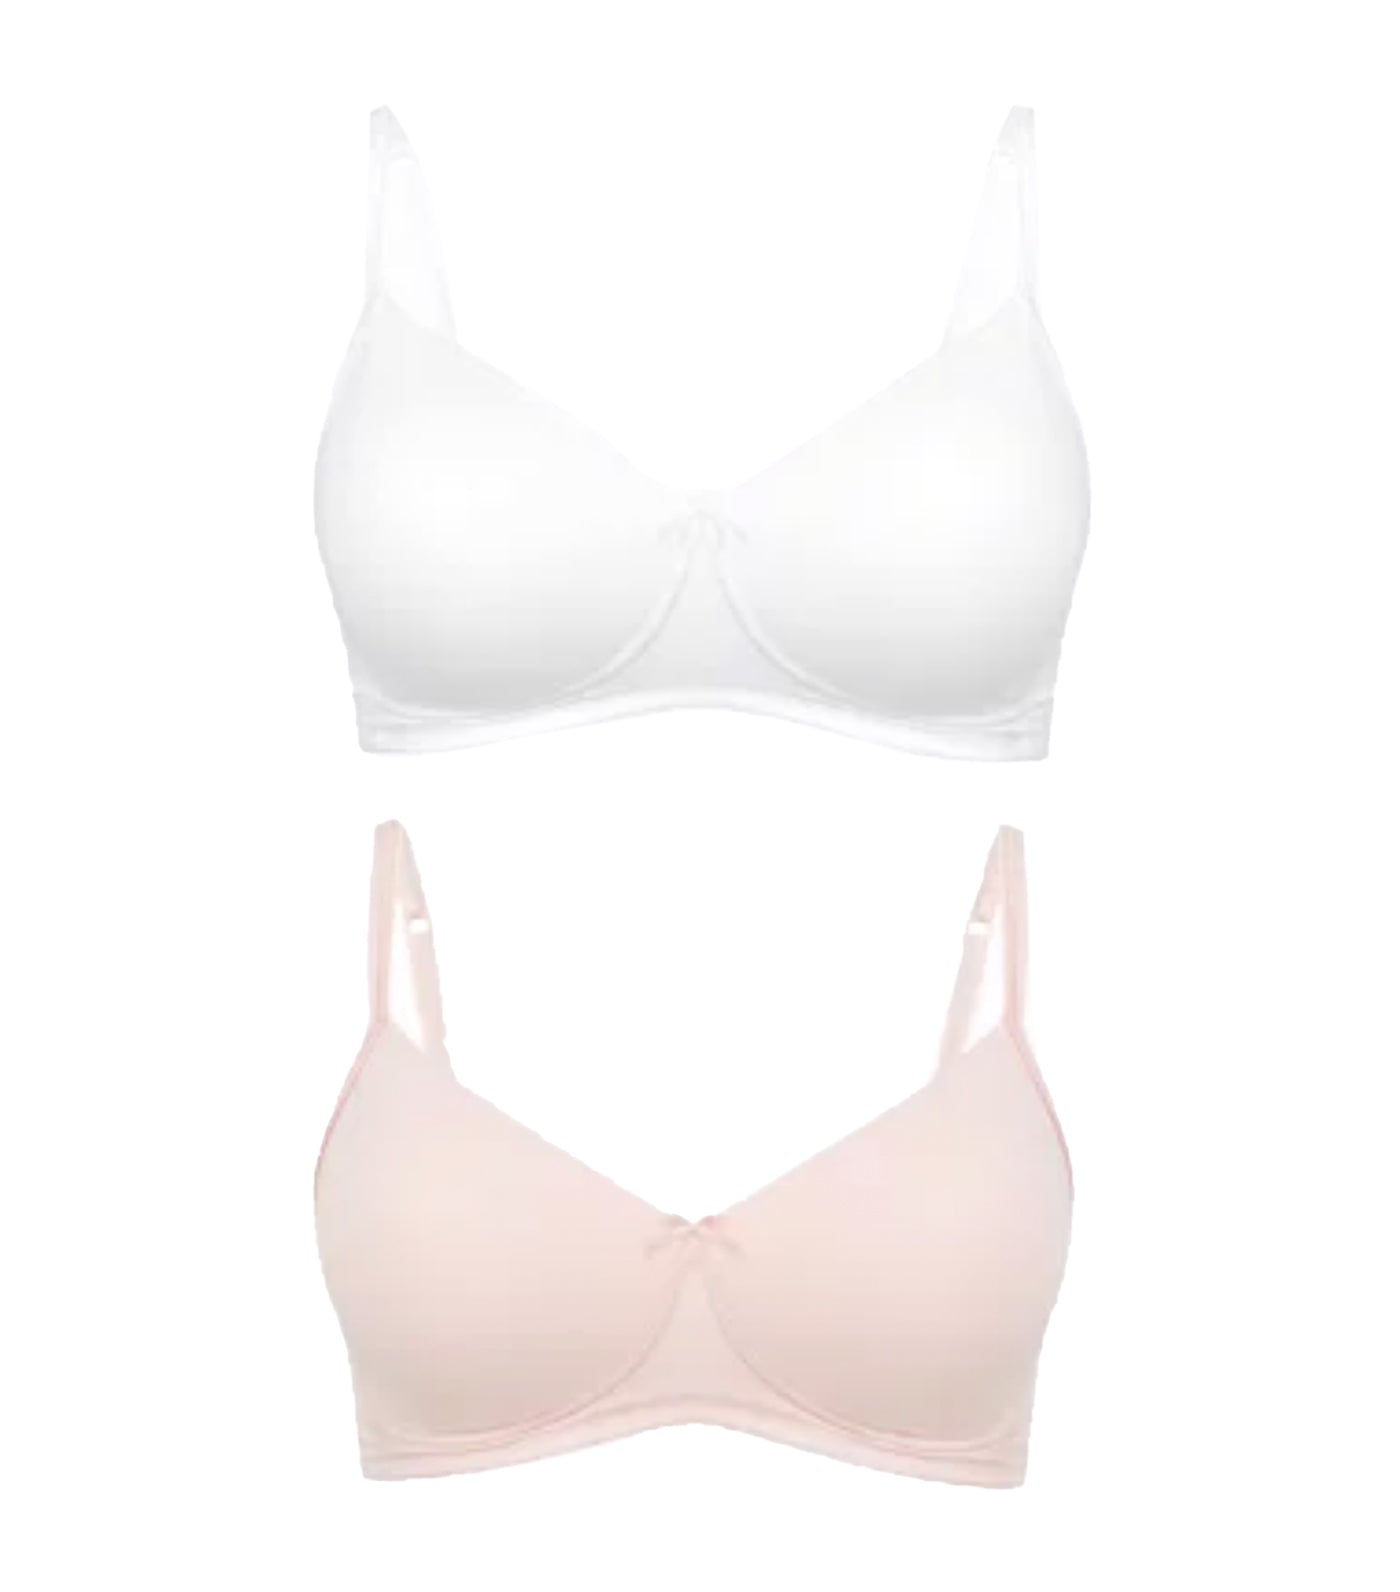 Marks & Spencer 2 Pack Cotton Rich Padded Full Cup Bras - White Mix